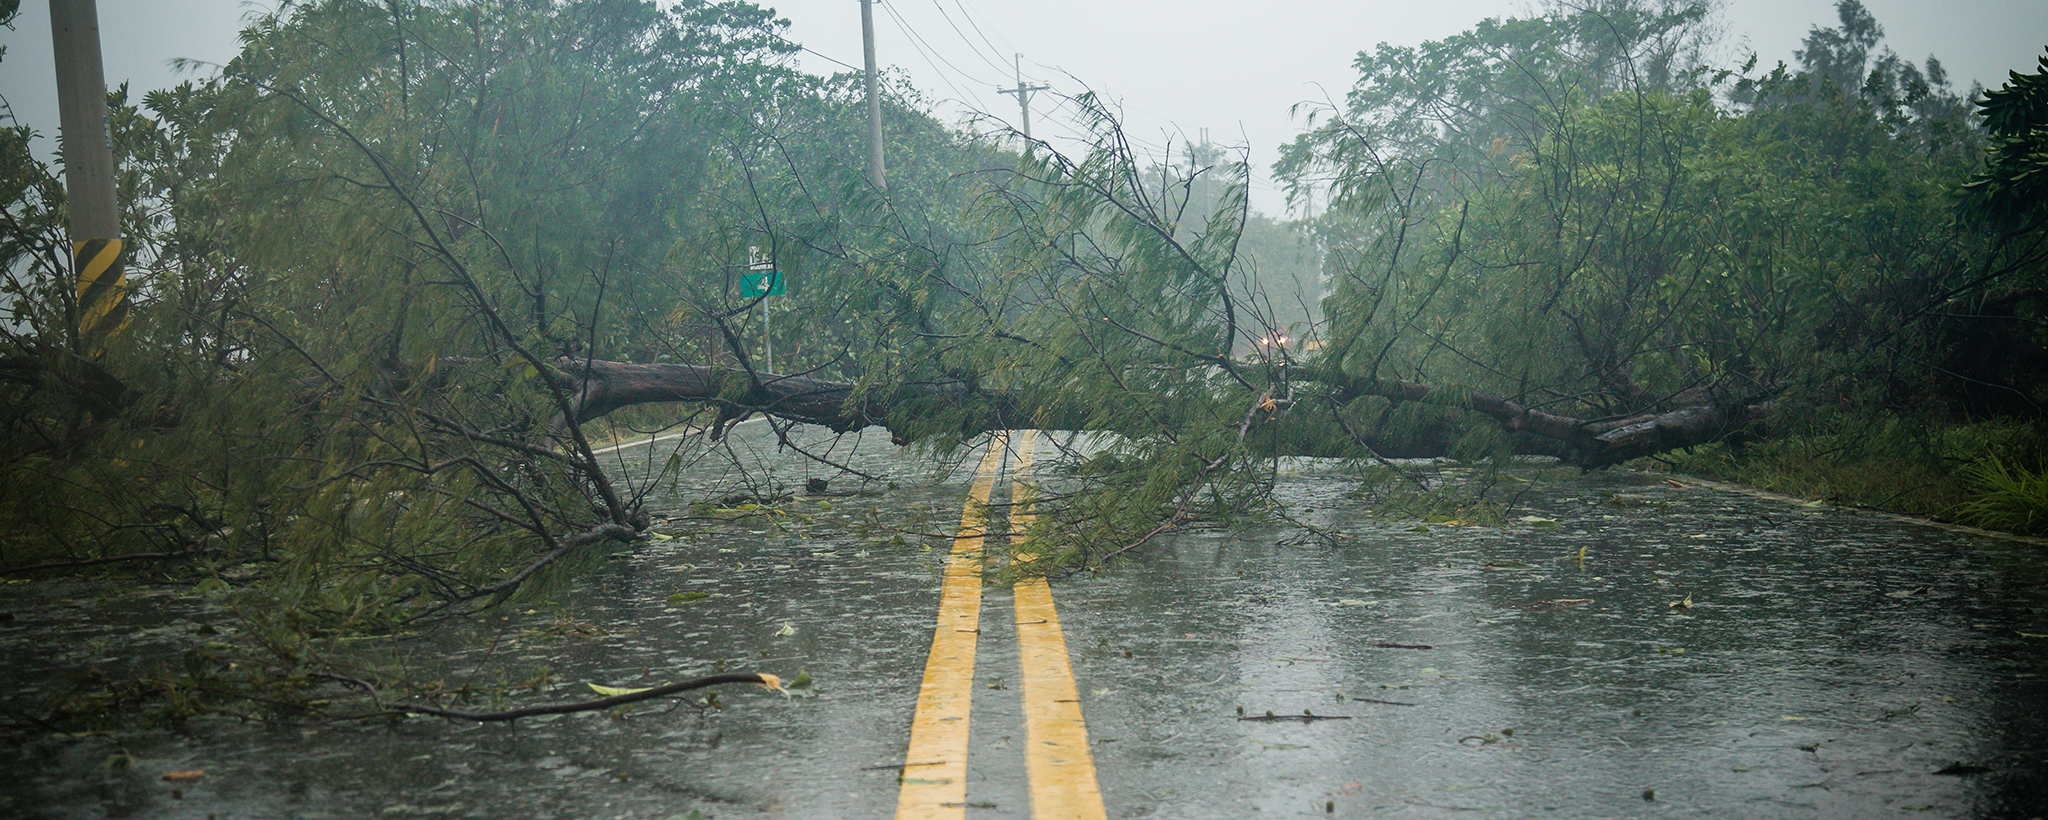 a downed tree blocks a road during a rain storm